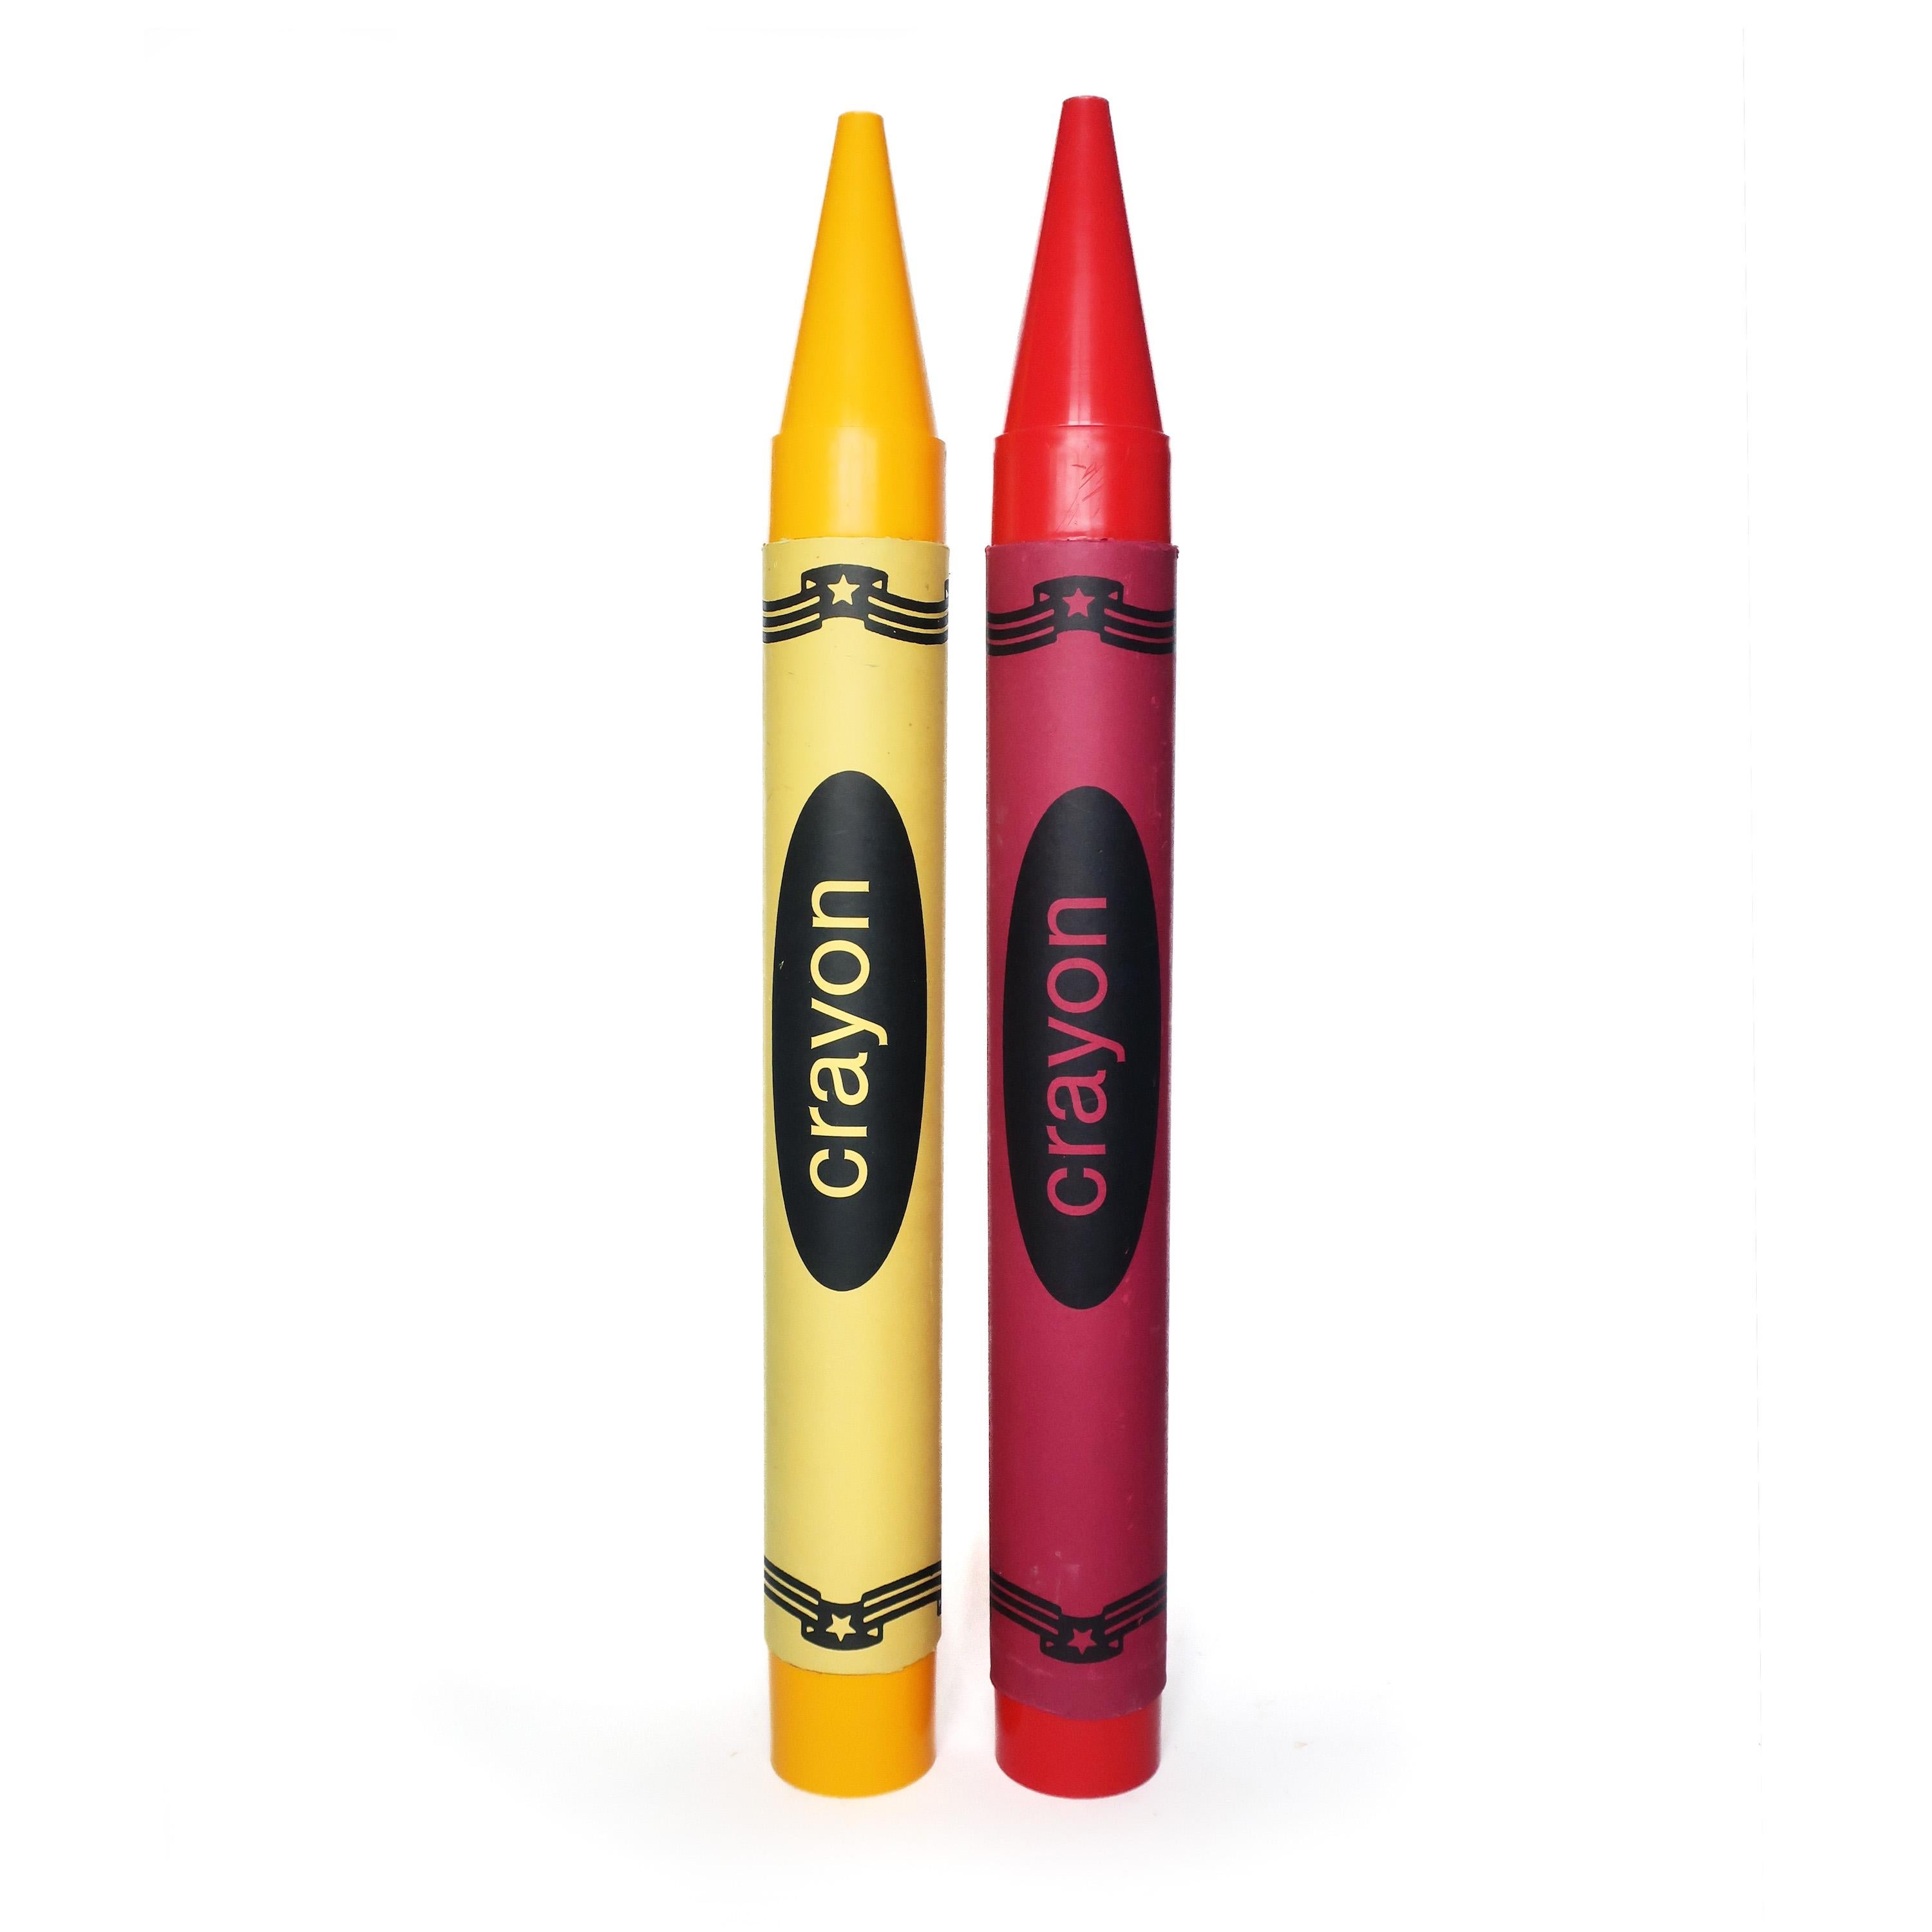 To call these giant vintage crayons oversized or statement pieces would be a huge understatement. Standing almost 5 feet tall, they are the coolest thing in almost any room. Great designer or display pieces that could also be hung from a ceiling as